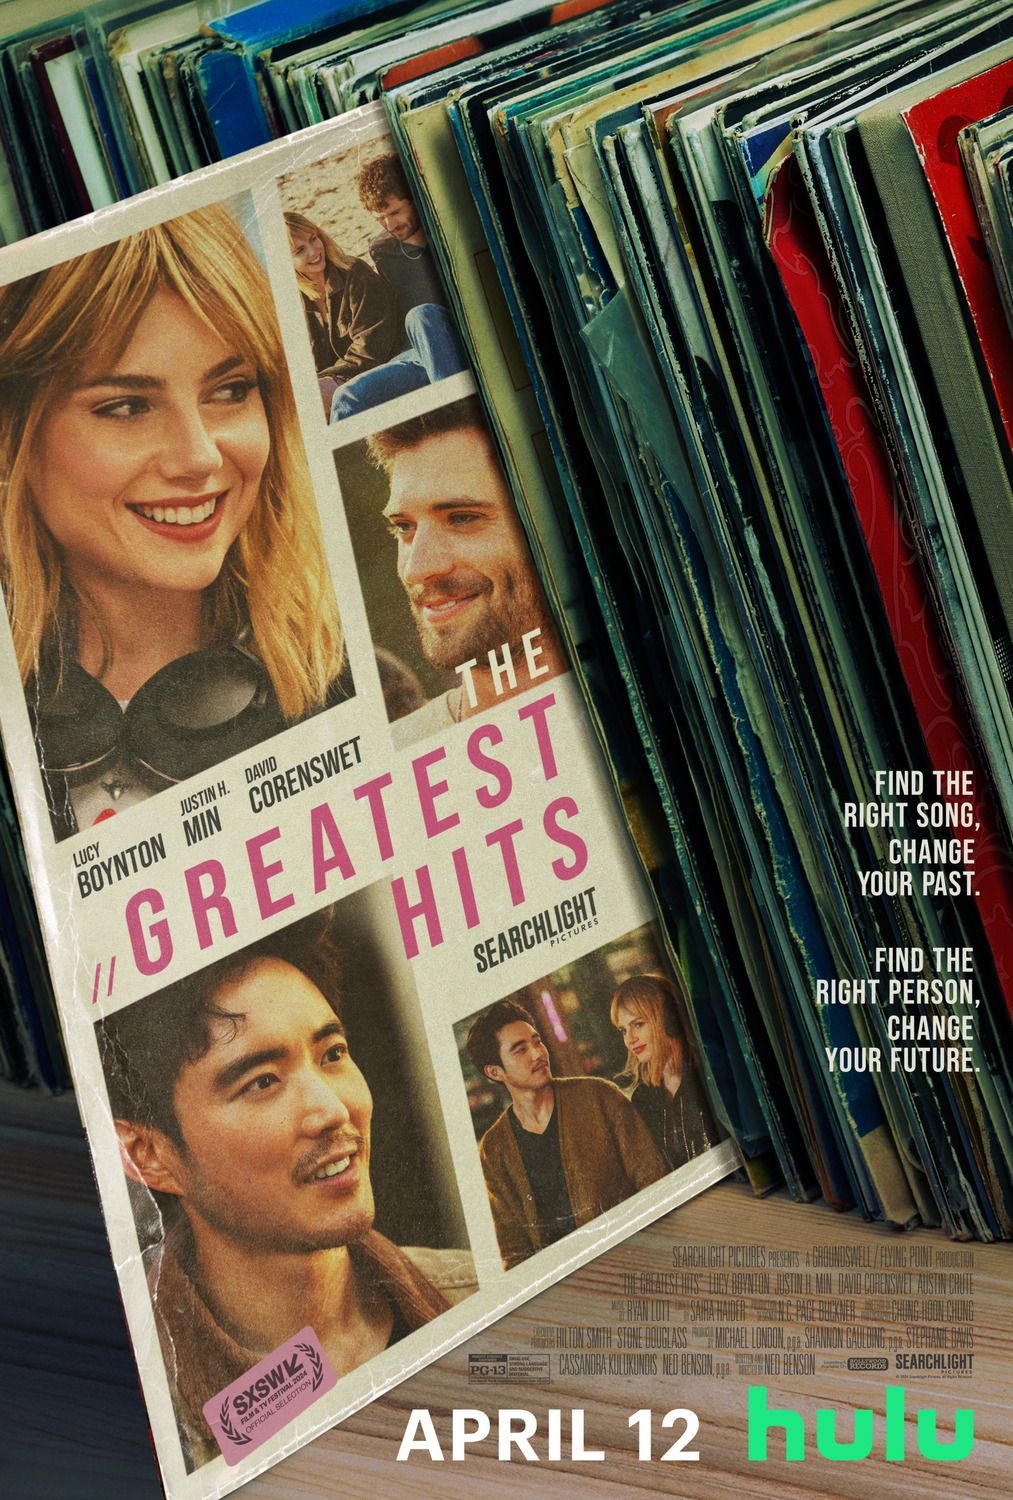 The Greatest Hits Movie Poster Showing the Cast on the Cover of a Vinyl Record